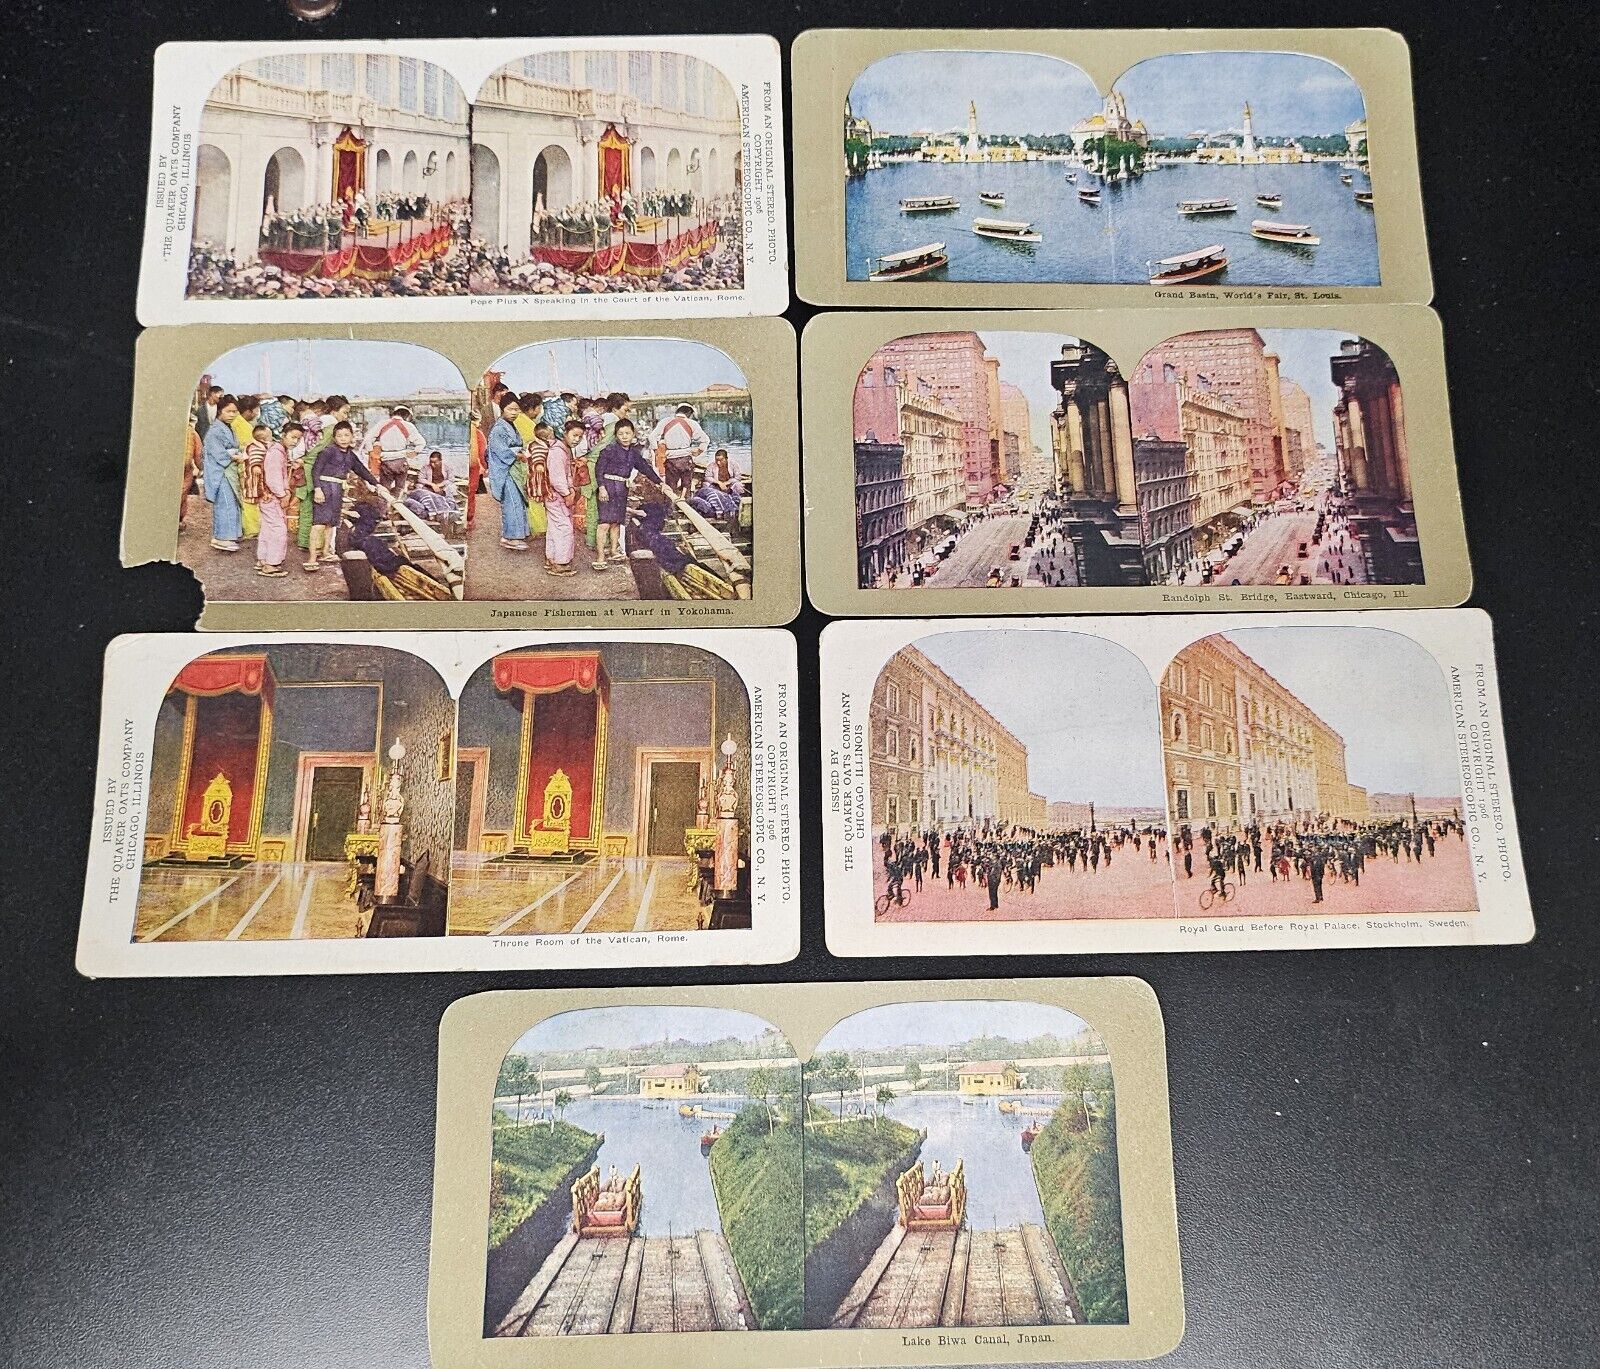 Around the World by Stereoscope | 7 Stereoview Cards in Color | Vintage Travel